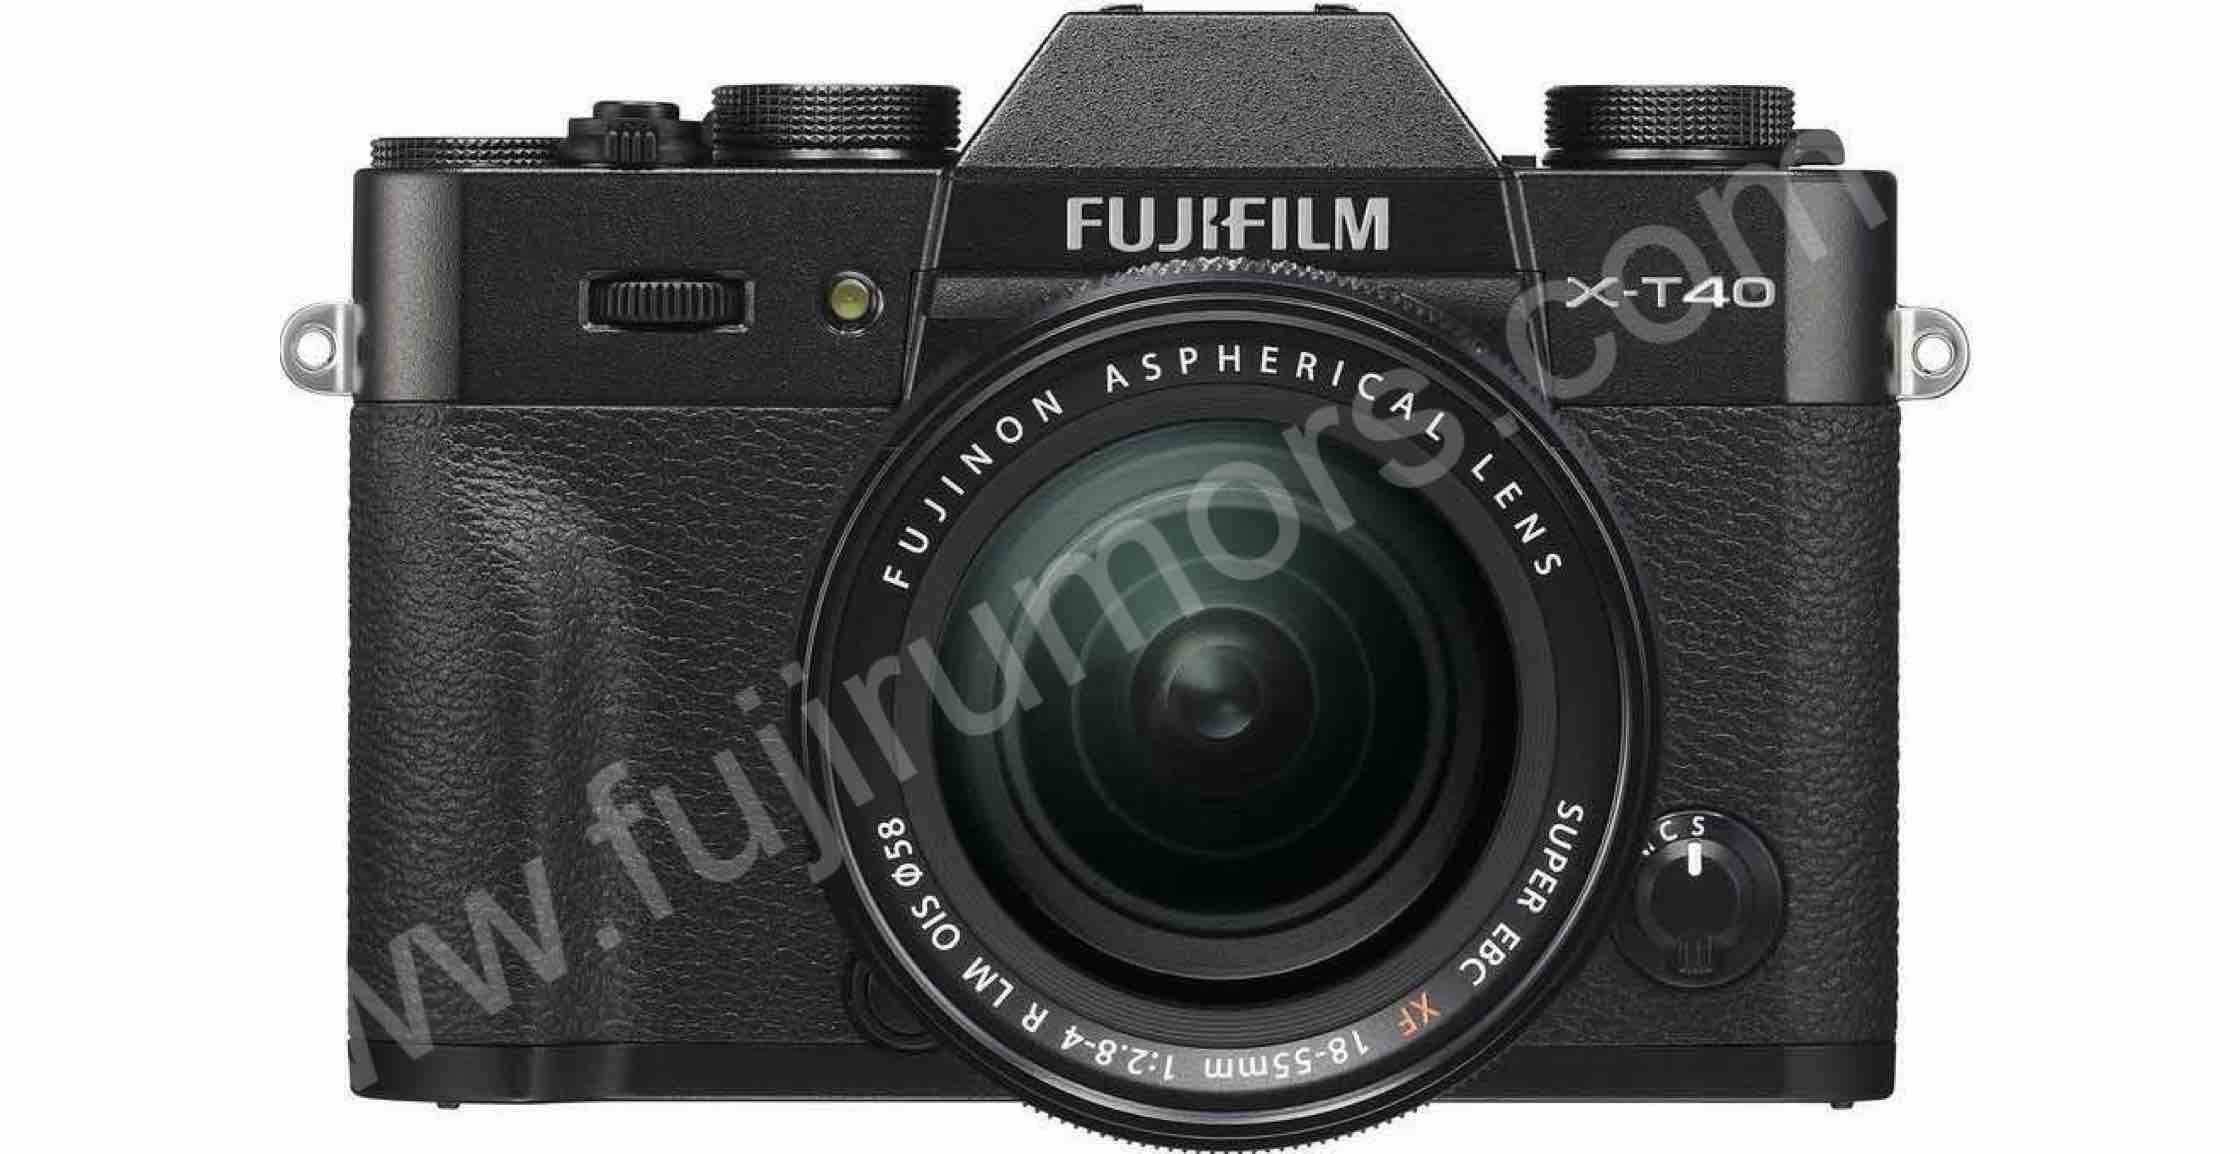 Middelen lanthaan fluiten Let's Be Clear: Fujifilm's Next X Series Camera will be Fujifilm X-H2 and  There Won't be Fujifilm X-T40 or X80 Before that - Fuji Rumors